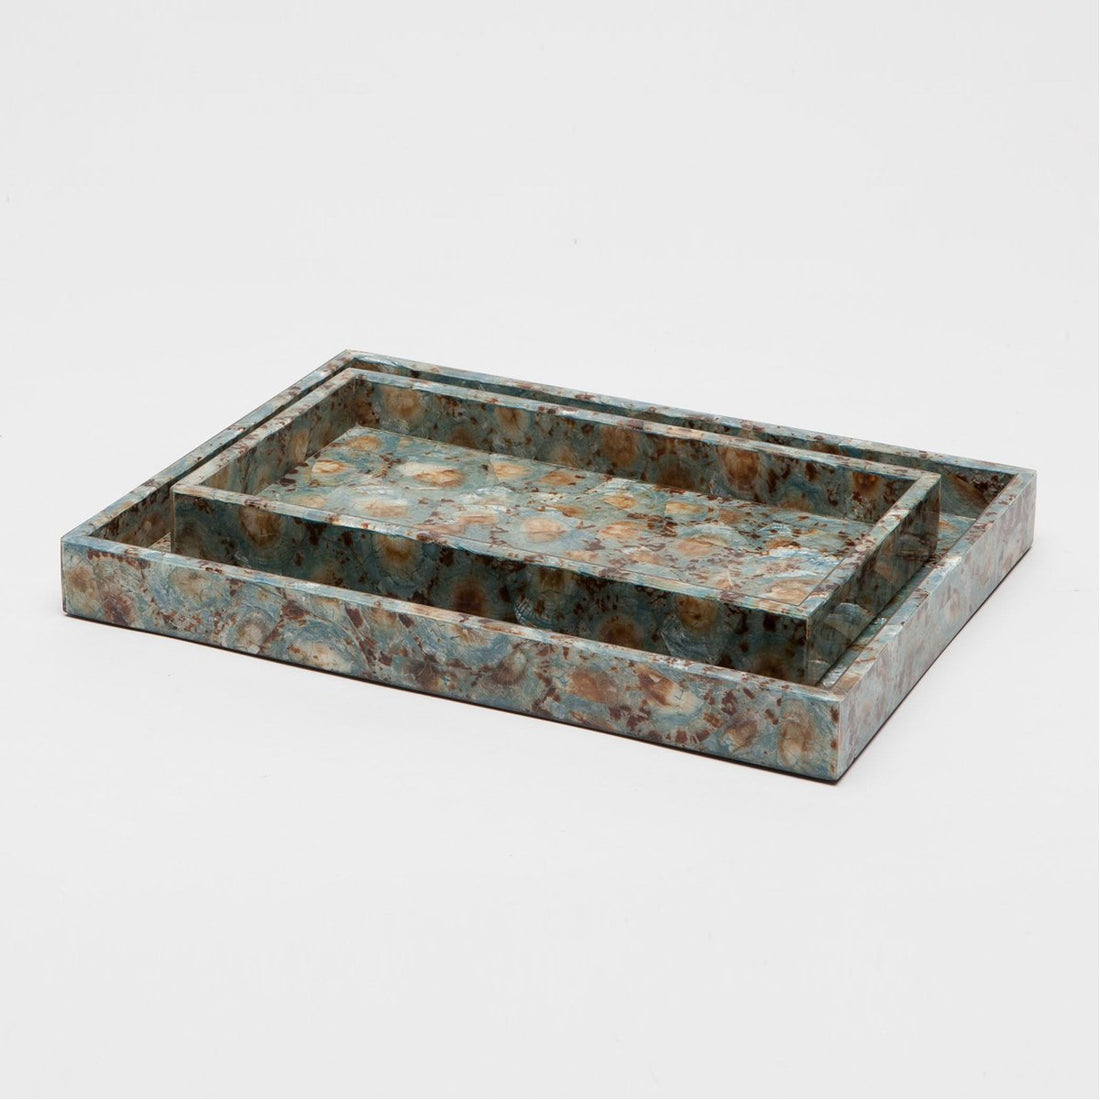 Pigeon and Poodle Sitges Rectangular Tray, Straight